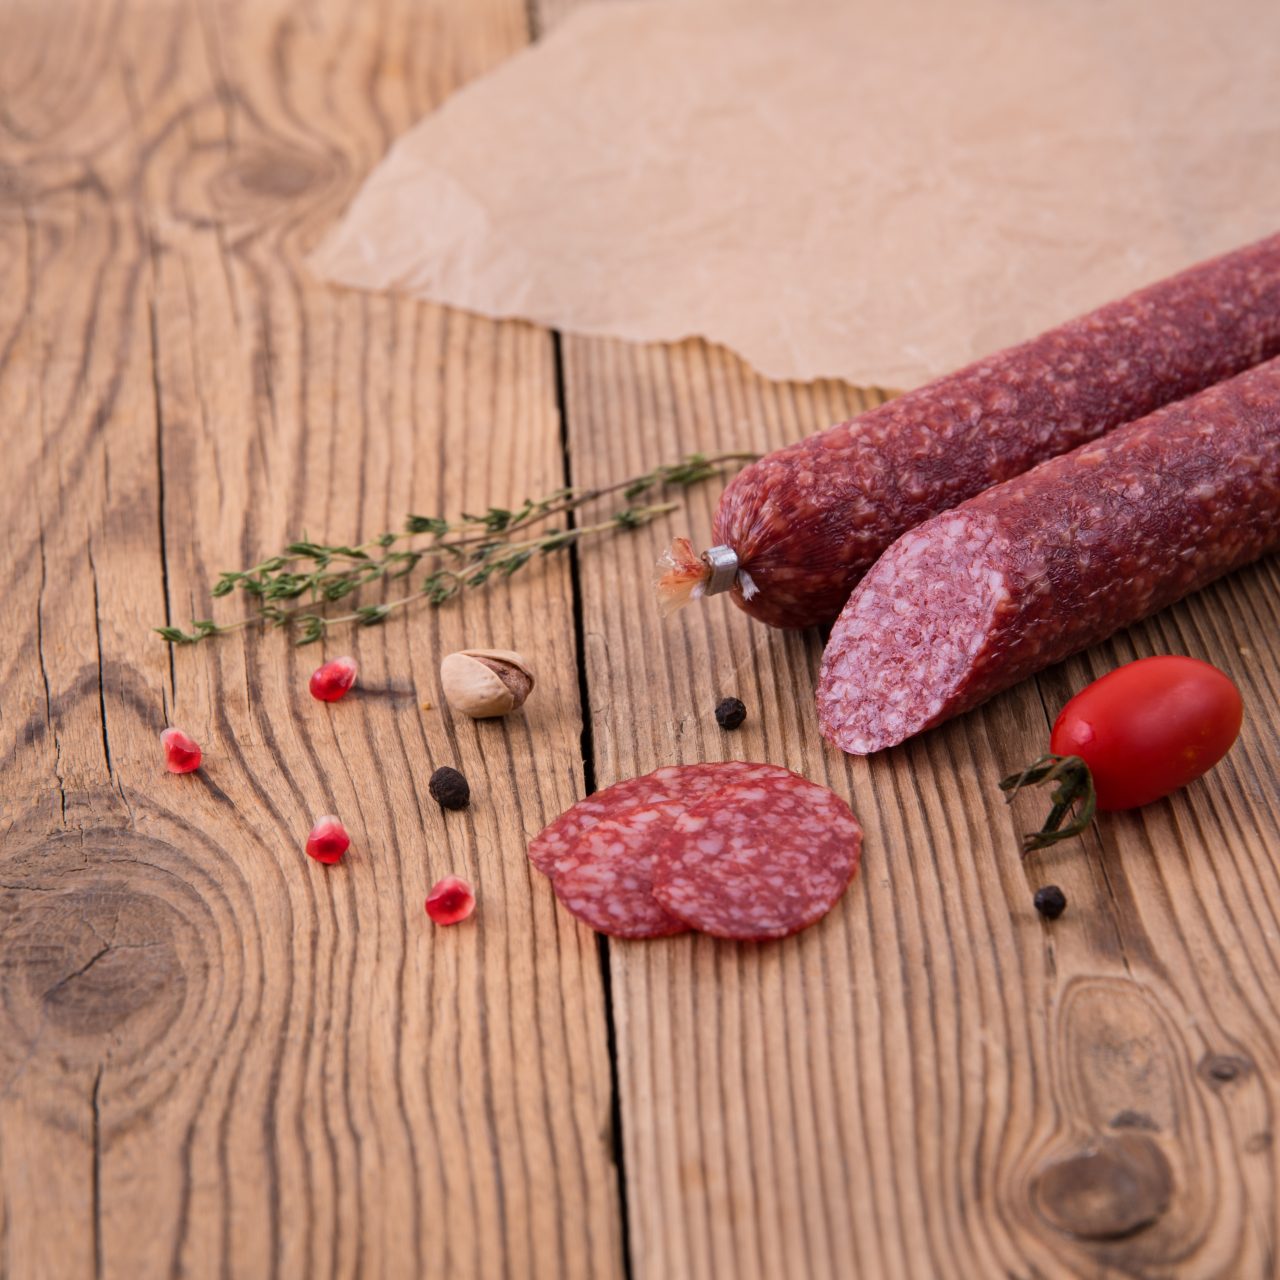 Raw,Smoked,Sausage,Lies,On,An,Old,Rustic,Wooden,Table